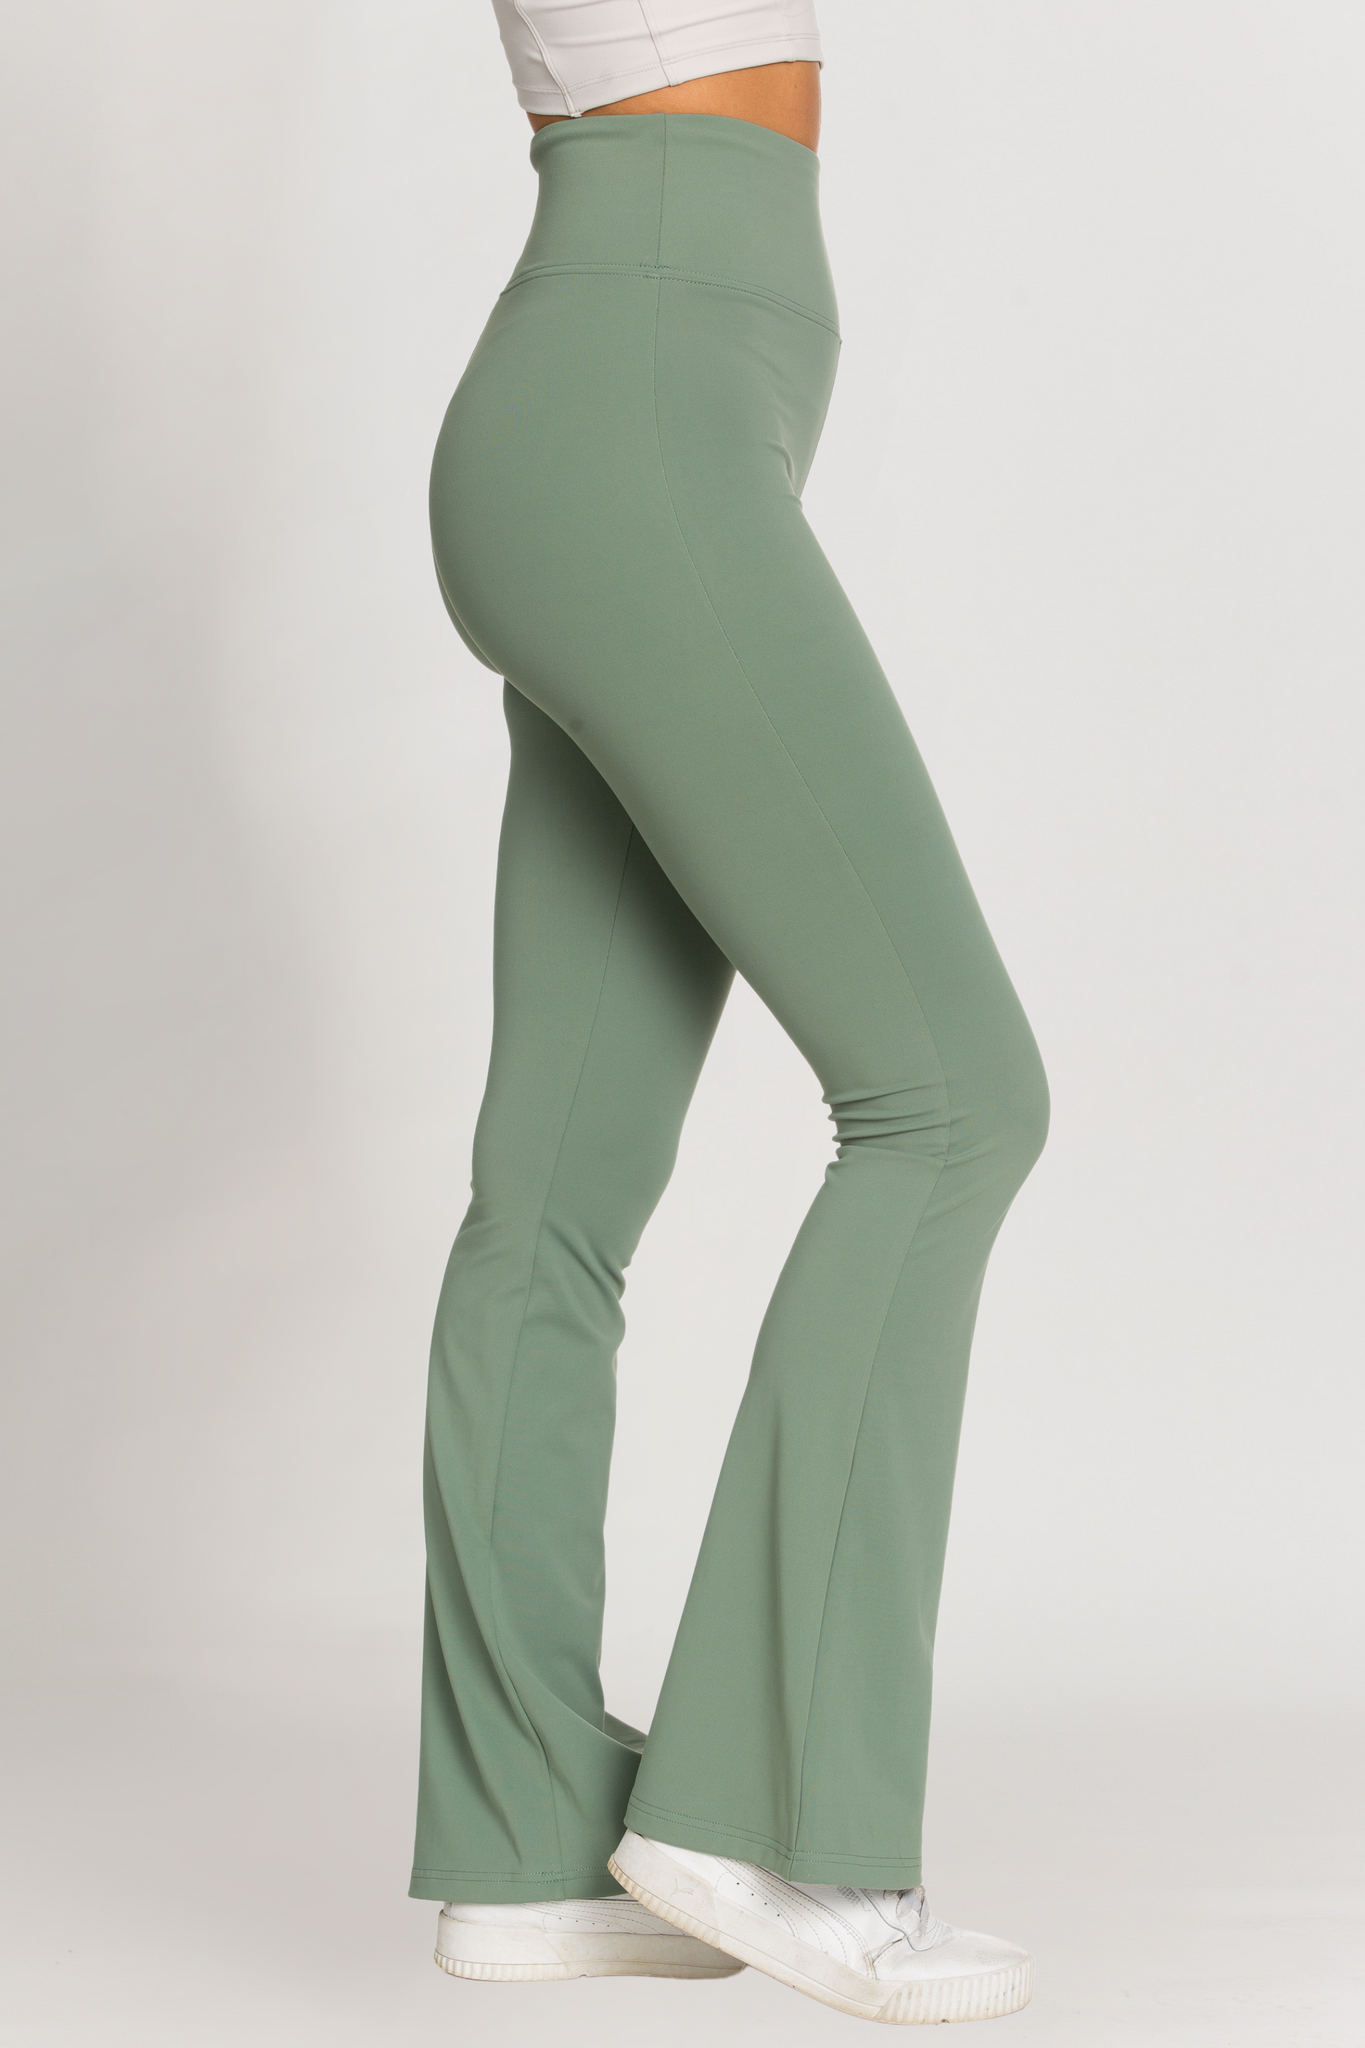 Yogalicious flare pants Green Size XS - $15 (25% Off Retail